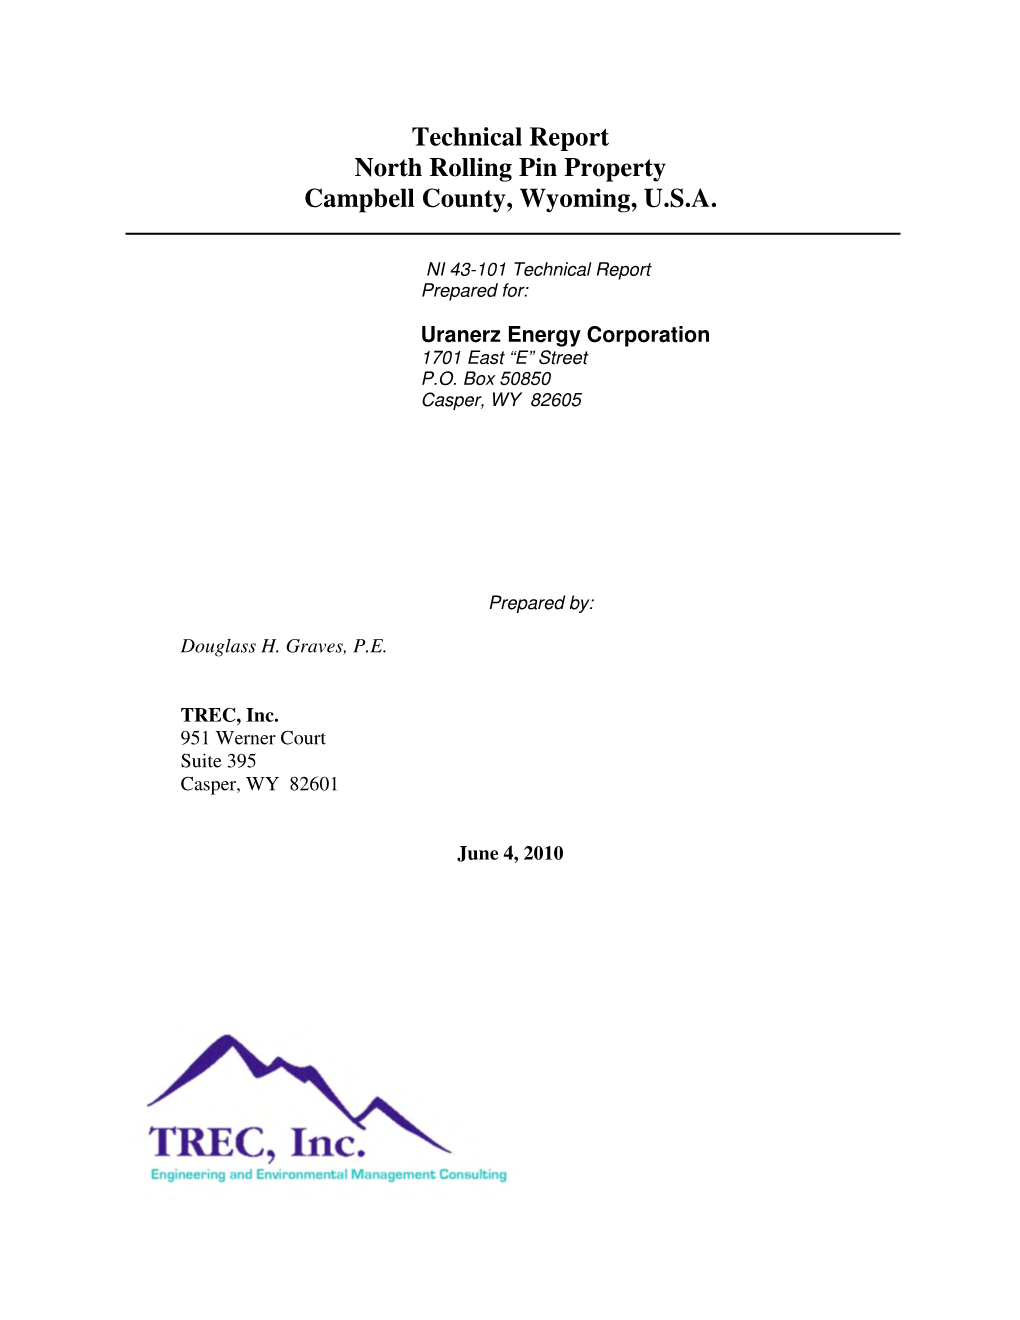 Technical Report North Rolling Pin Property Campbell County, Wyoming, U.S.A